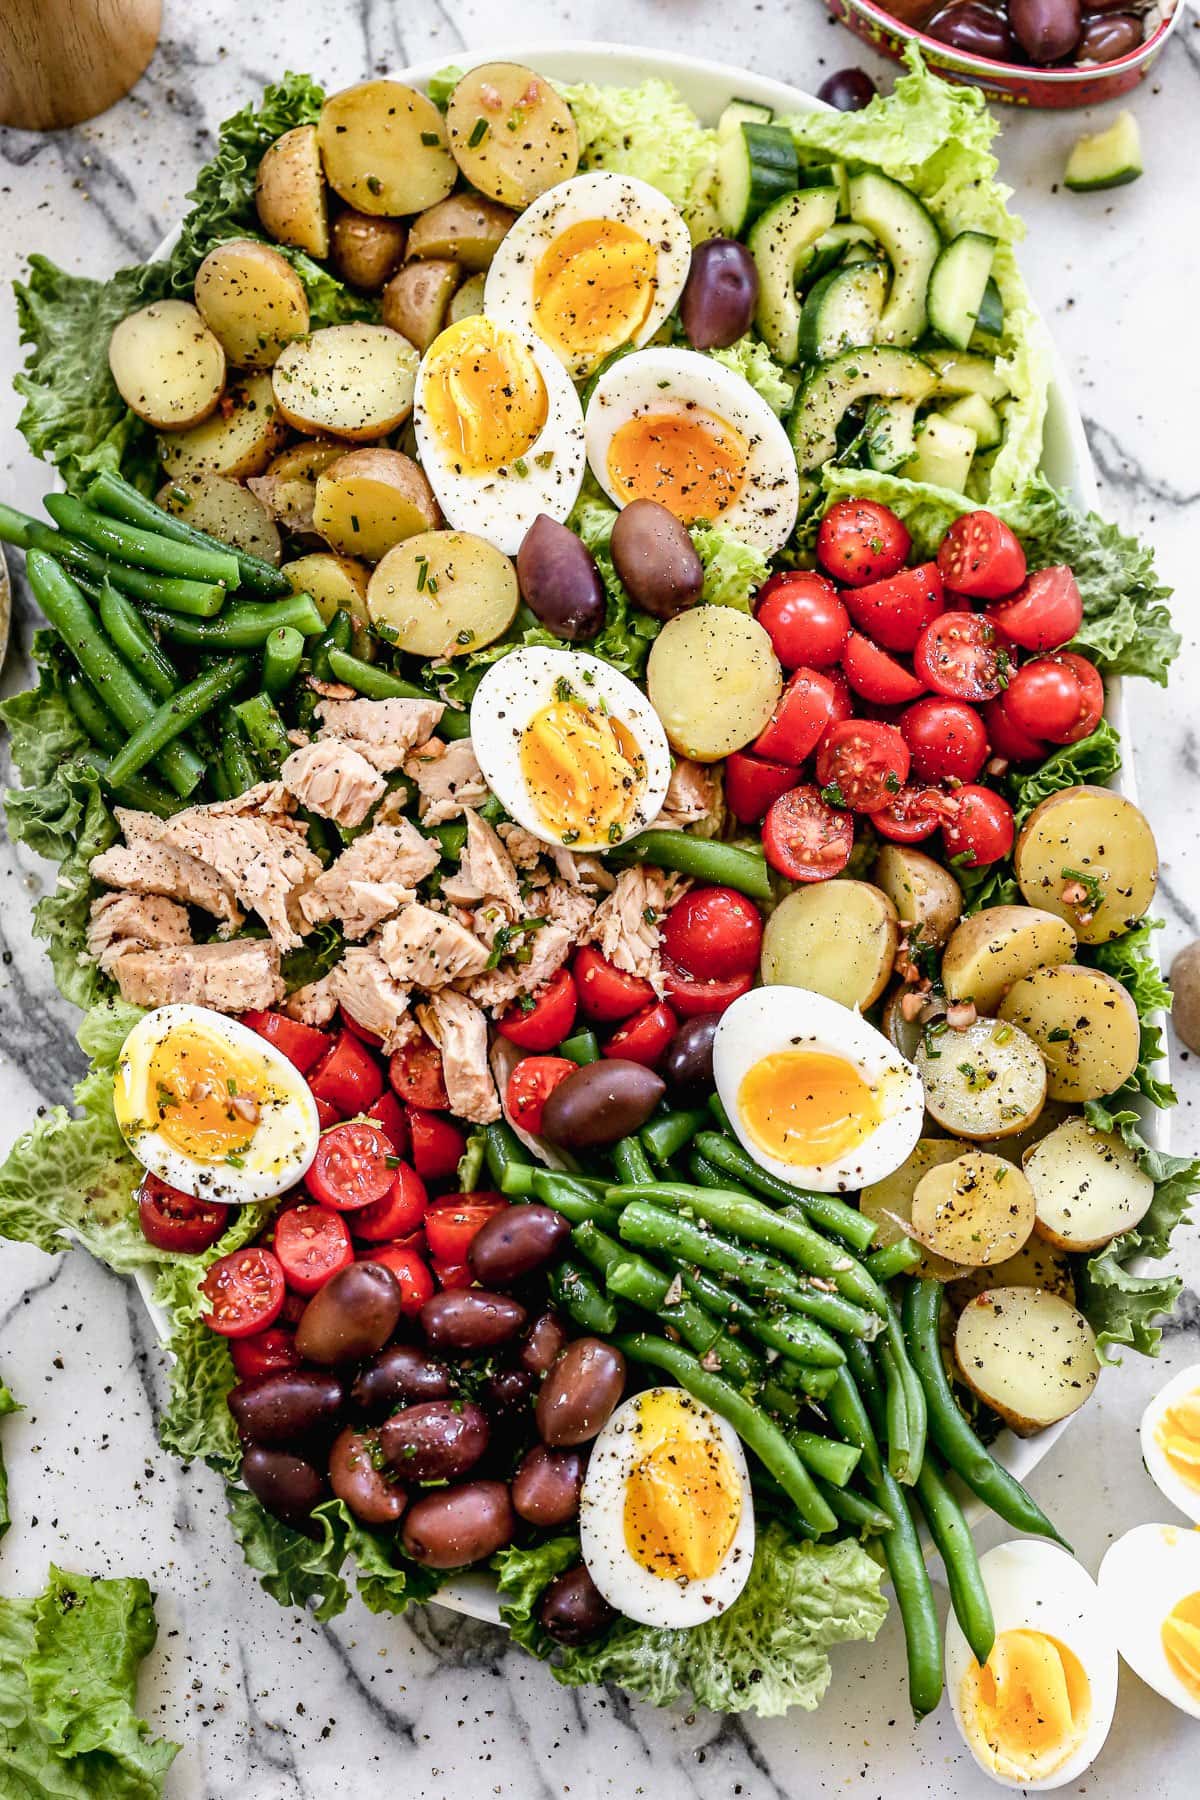 Nicoise salad served on a platter with eggs